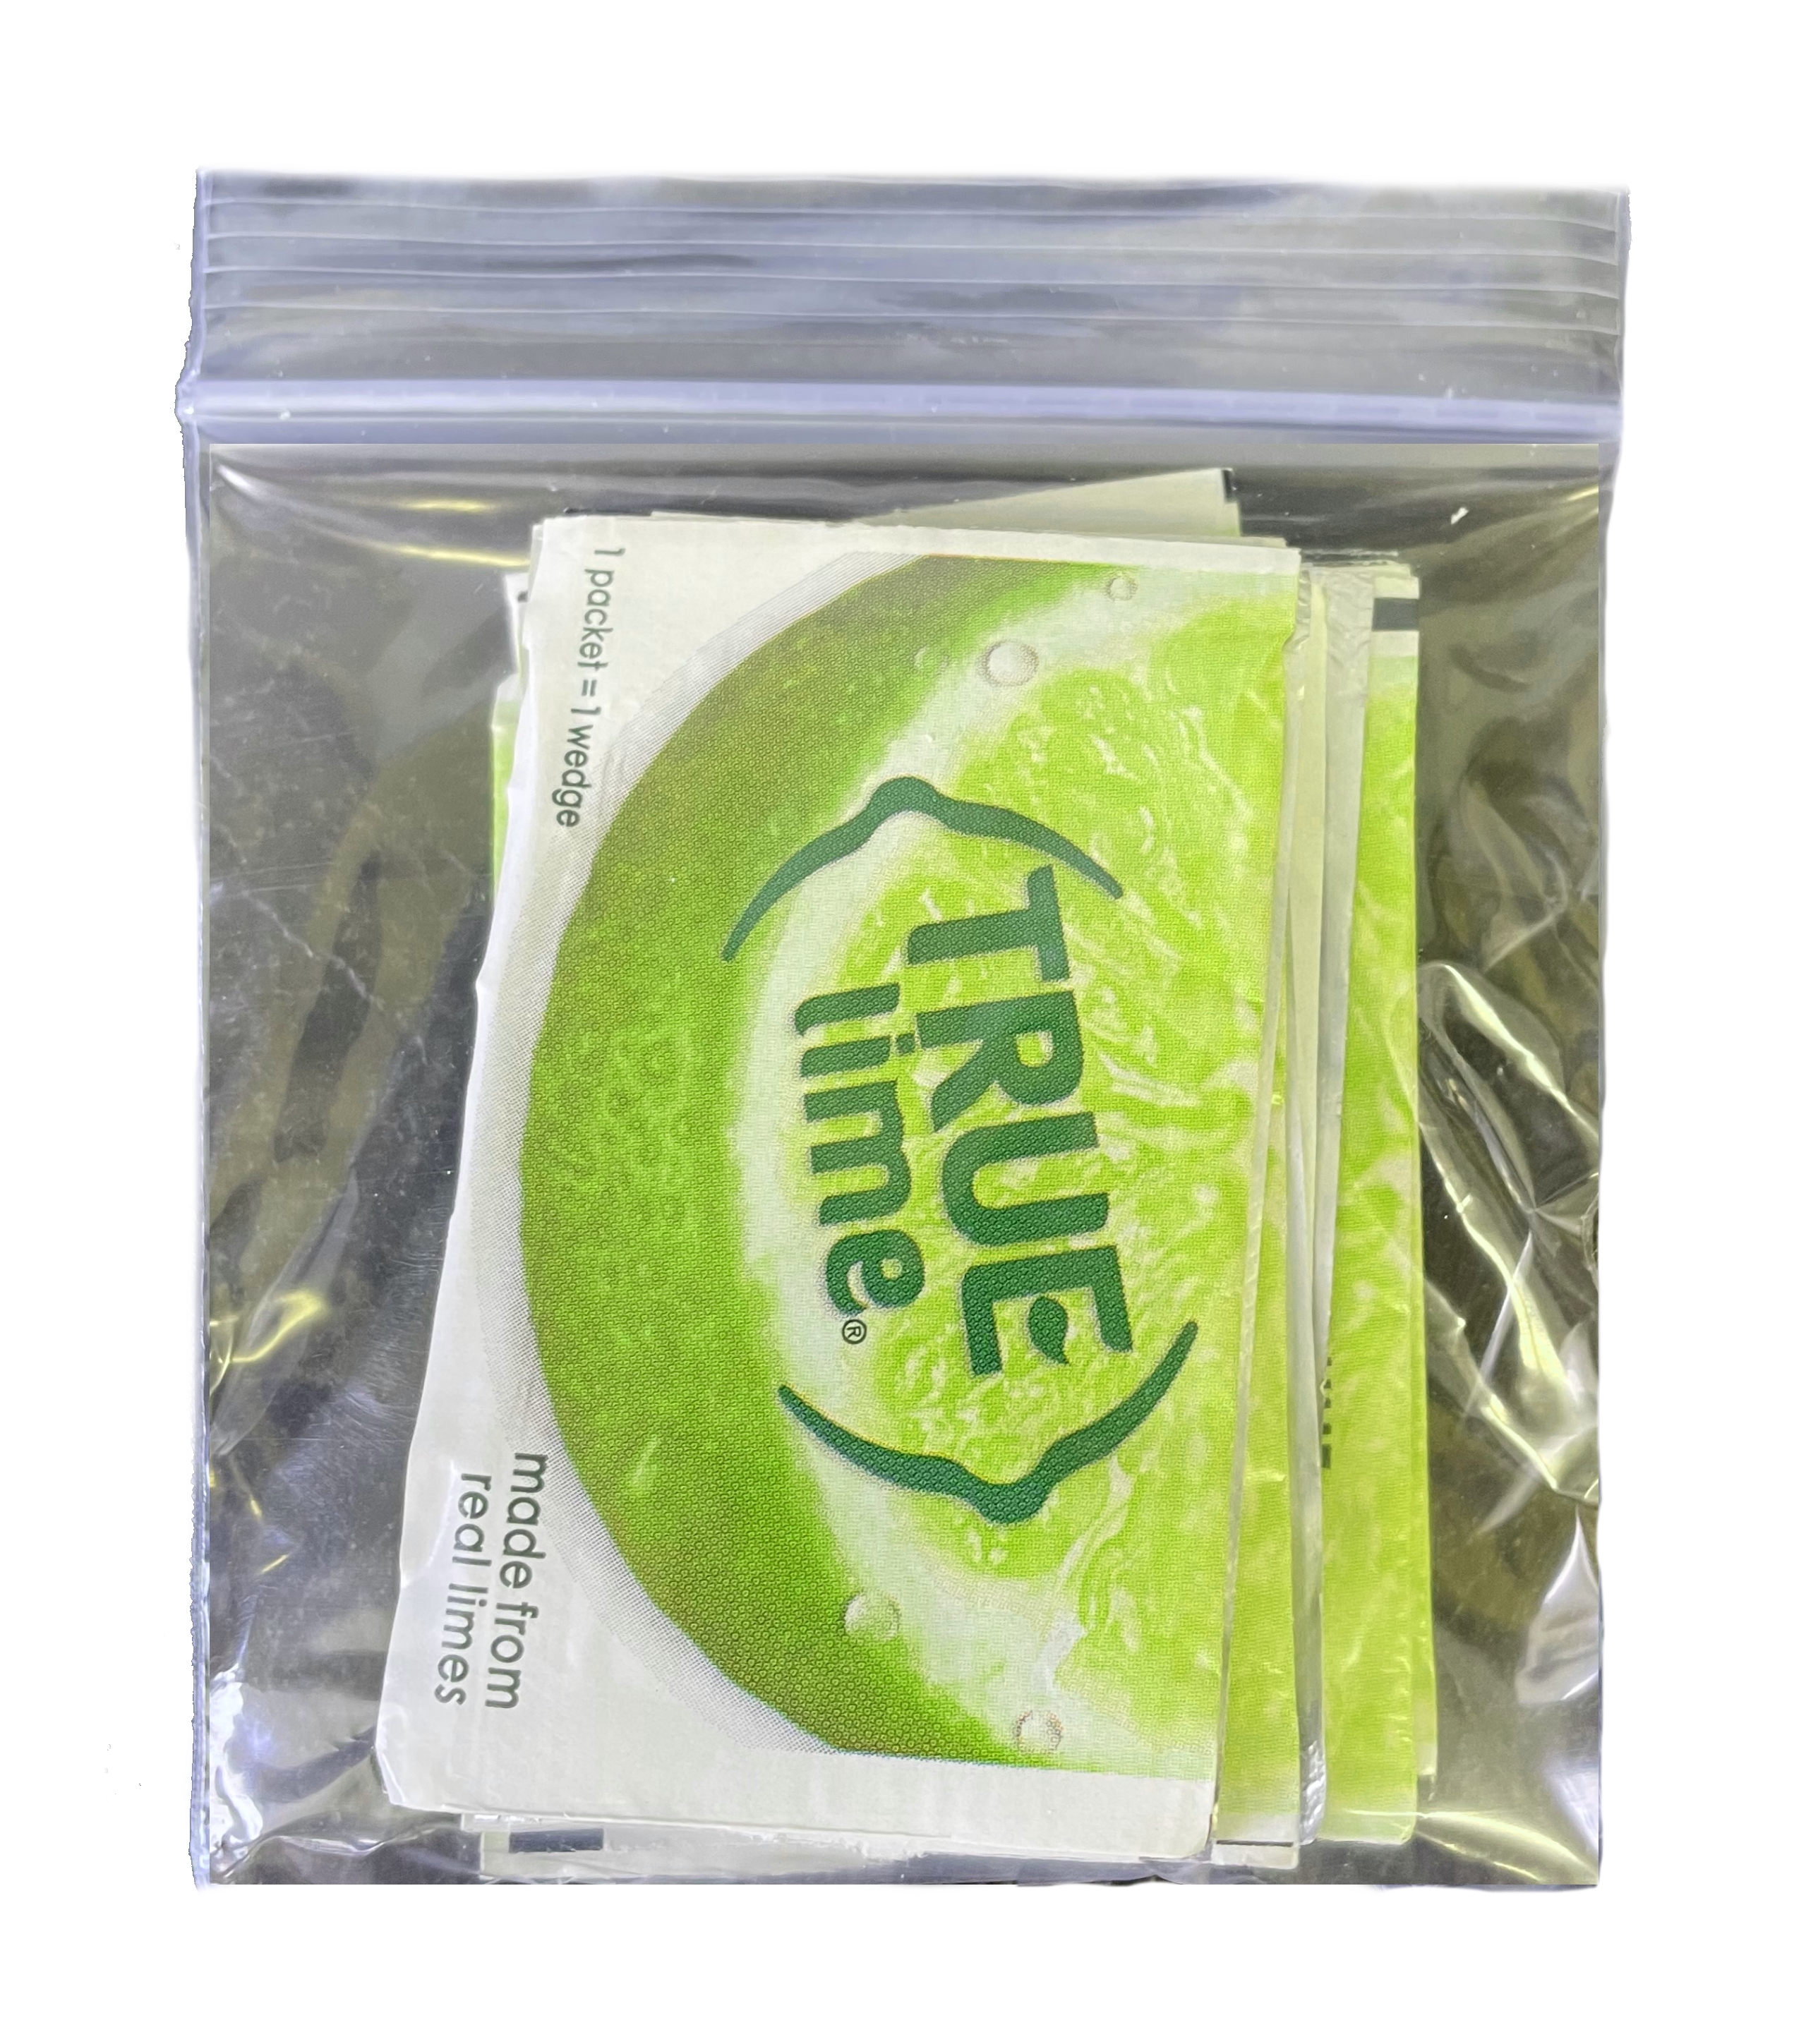 True Lime® Crystallized Lime Juice Packets